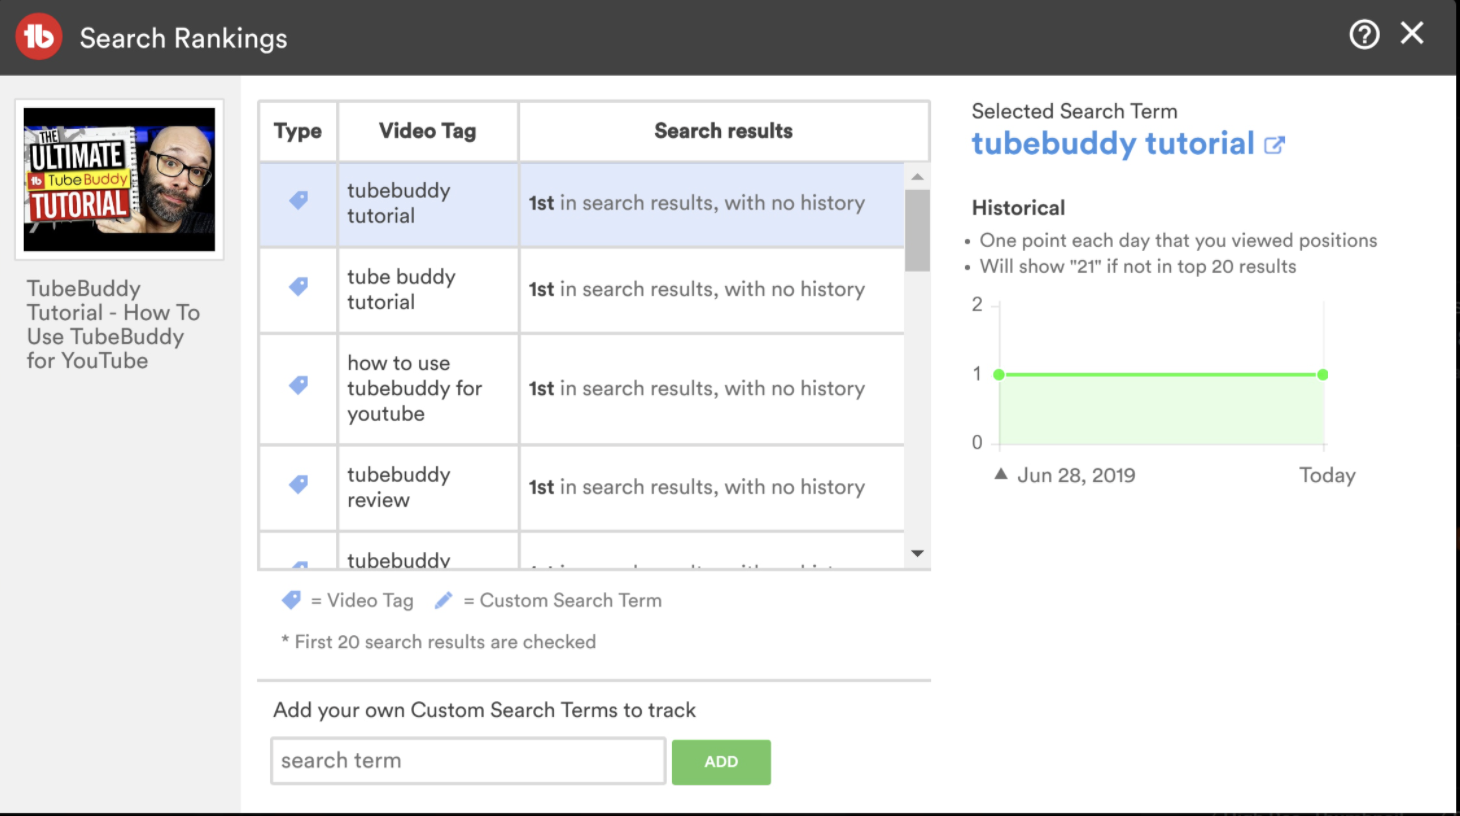 Search rankings from TubeBuddy